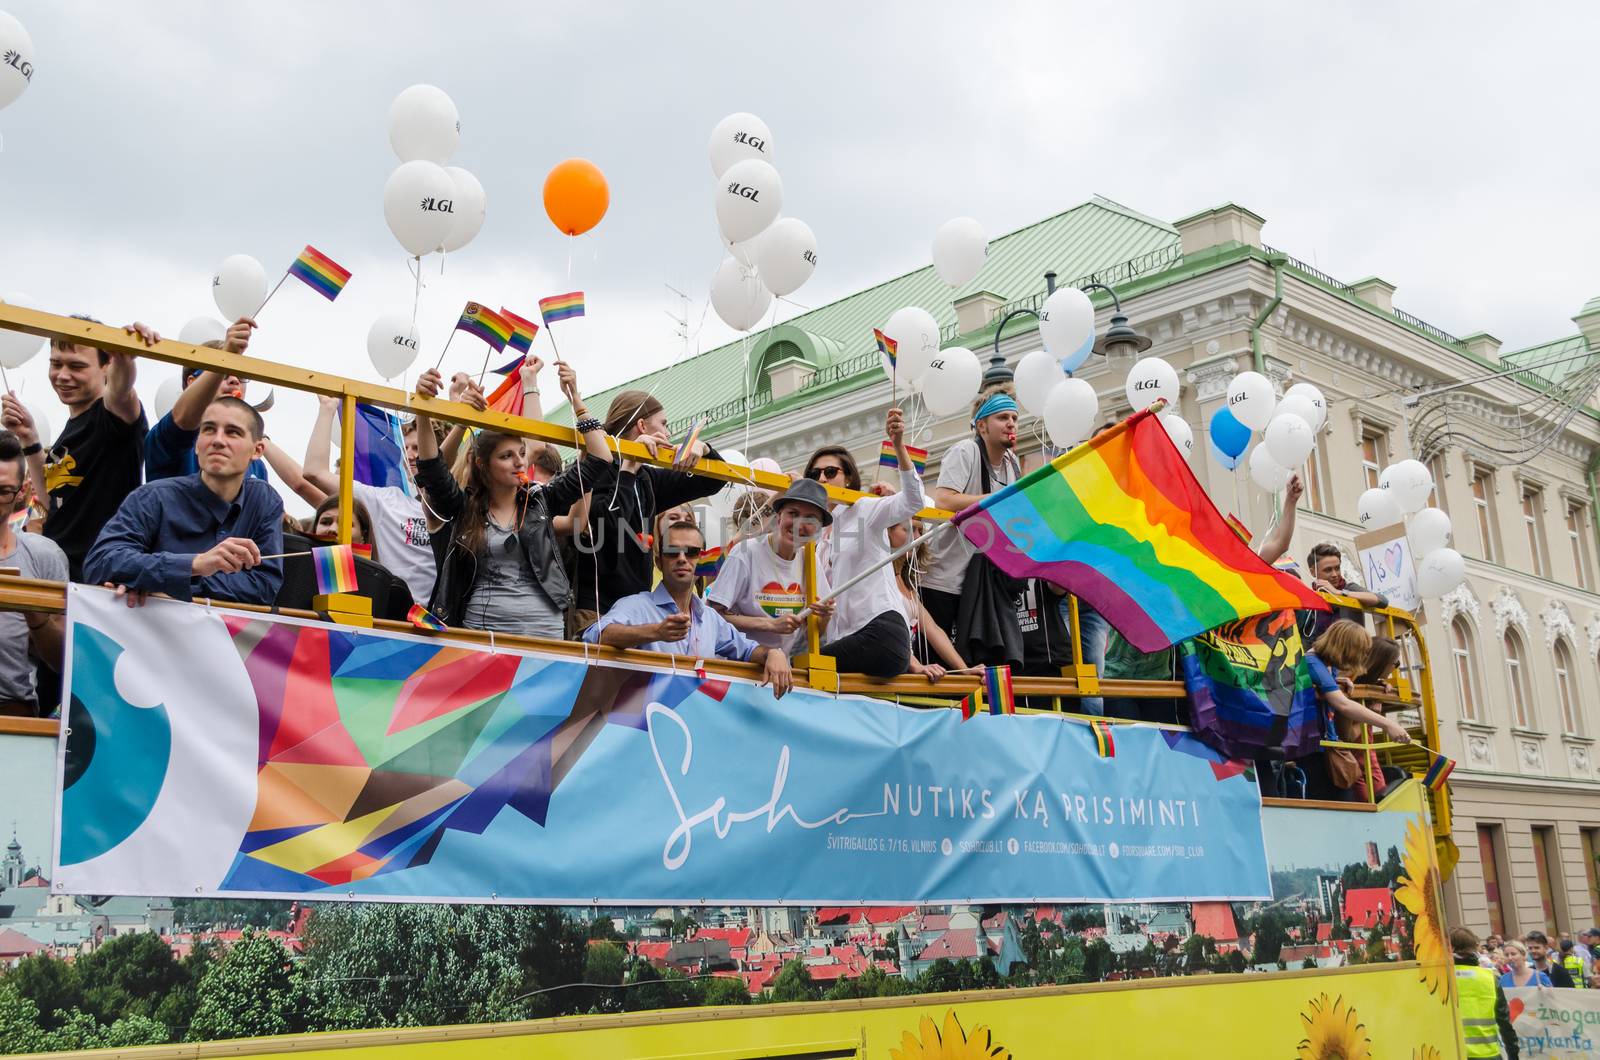 VILNIUS, LITHUANIA - JULY 27: open bus rides large group of participants in the Baltic pride gay parade with banners balloons flags on July 27, 2013 in Vilnius.